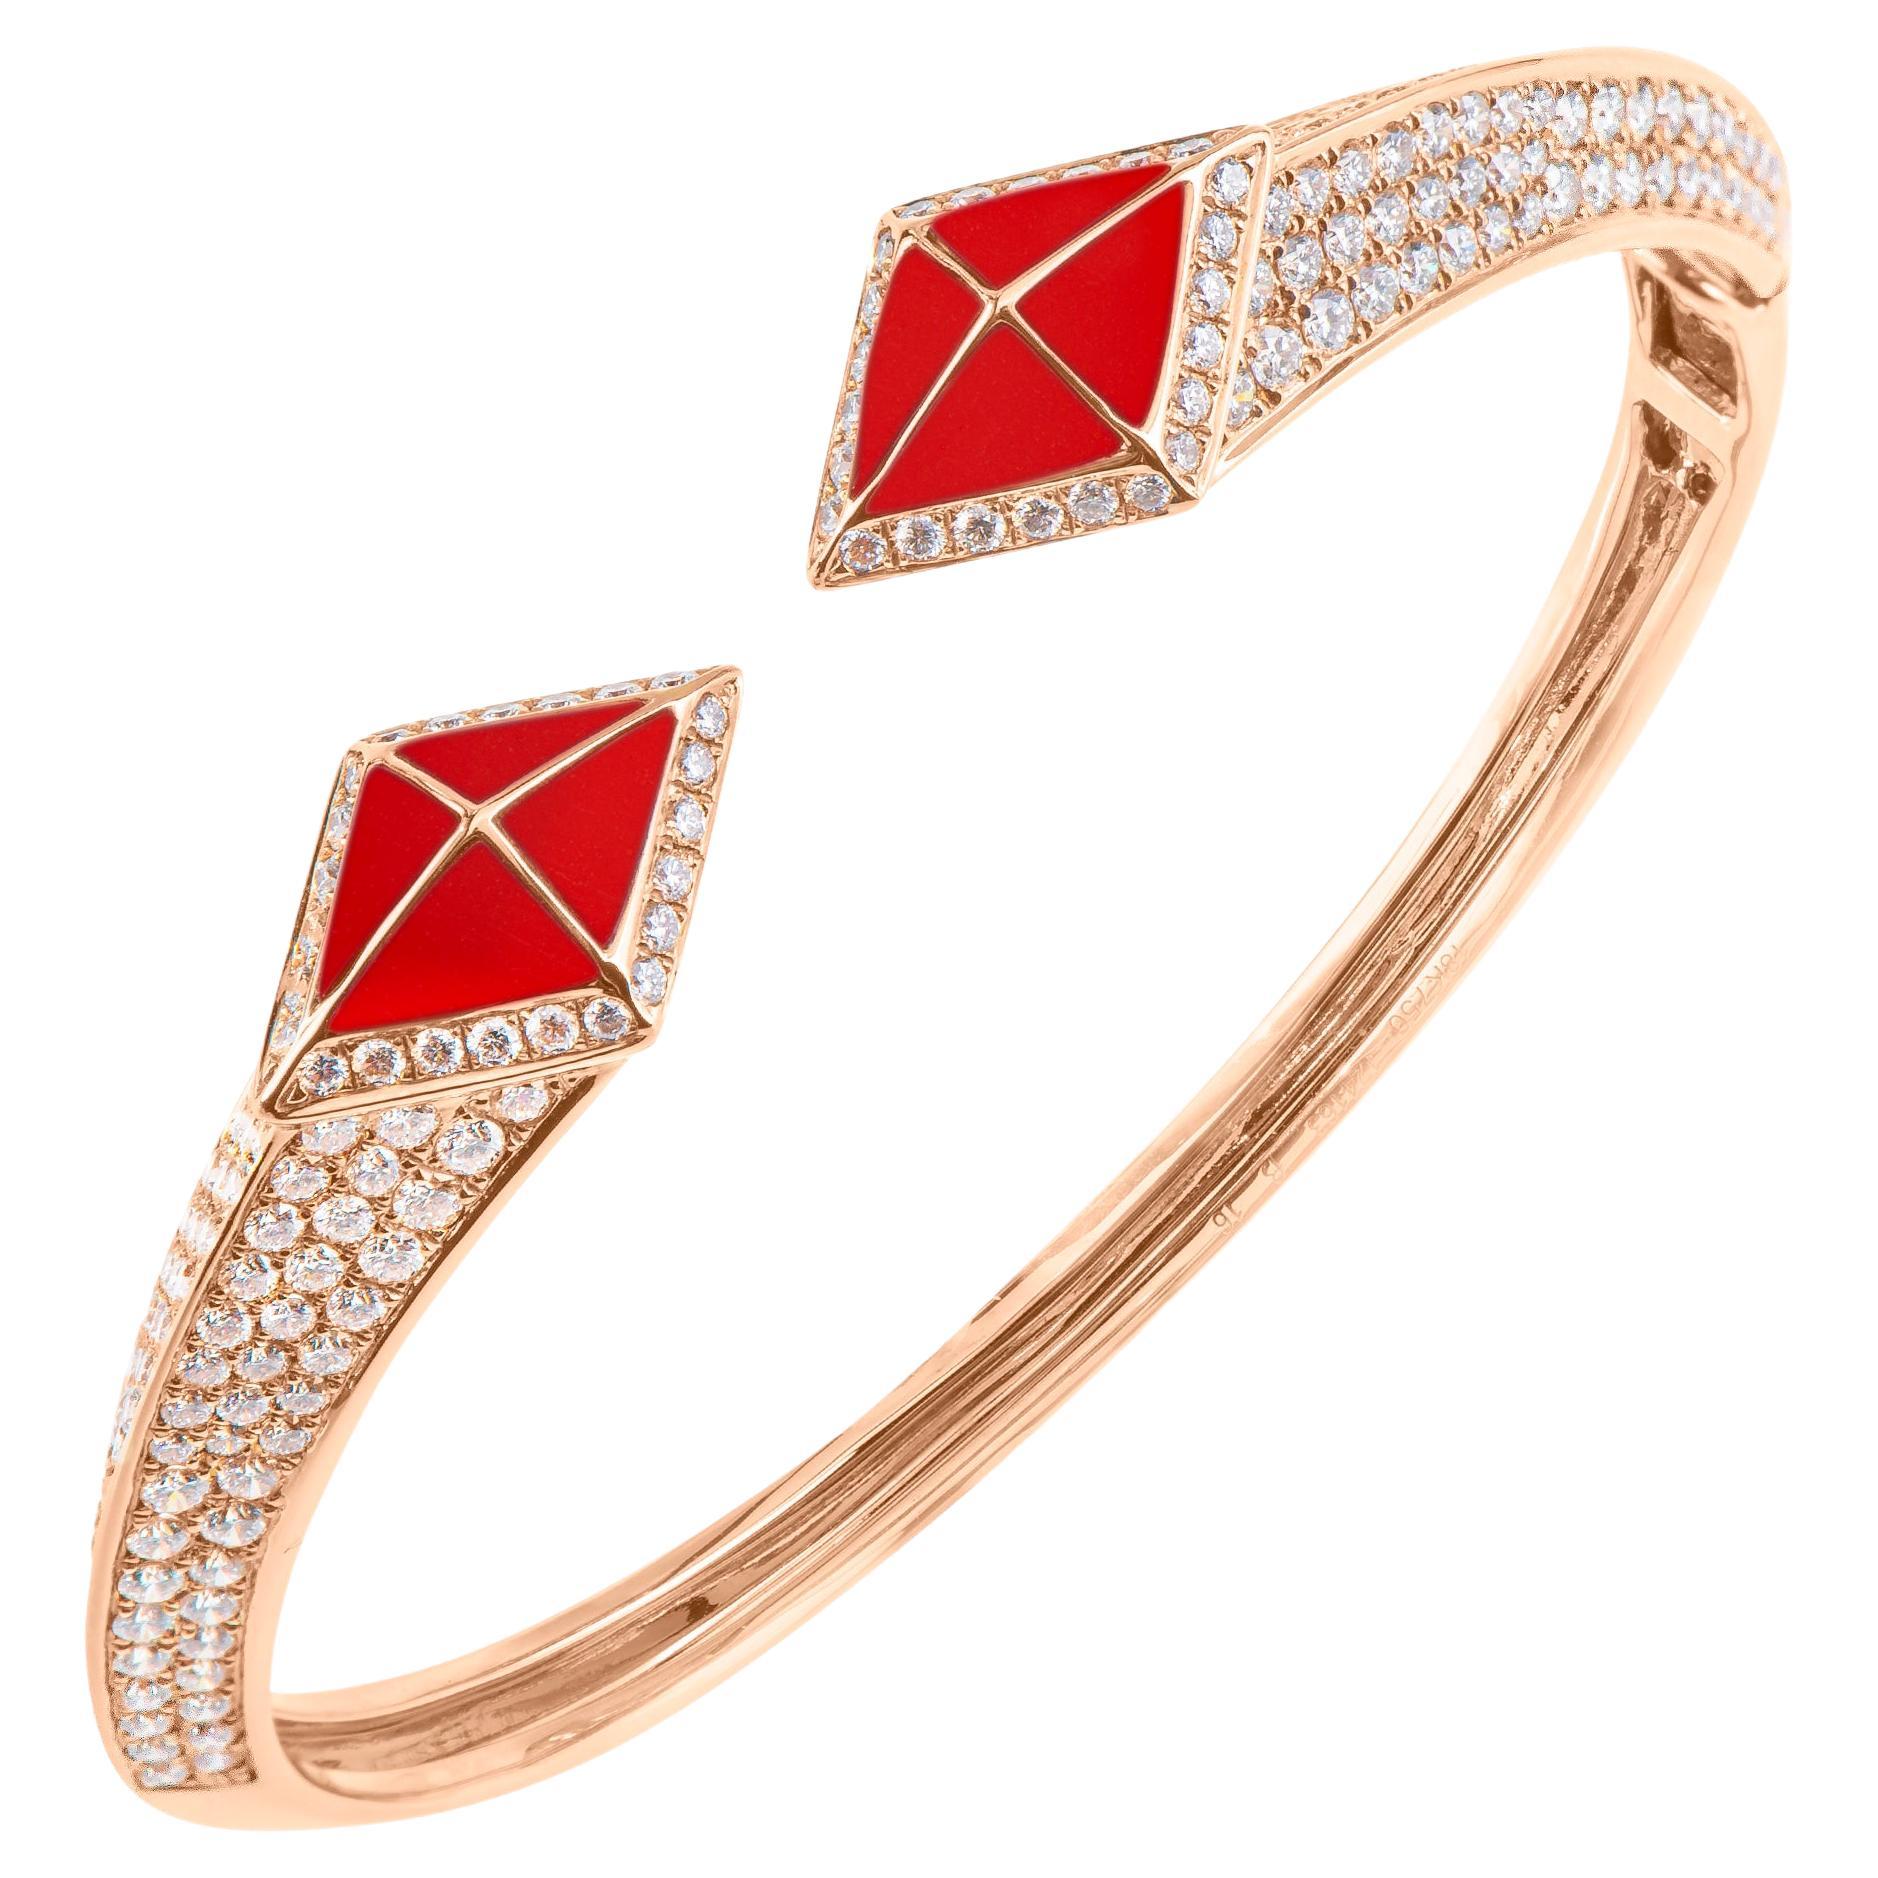 Tetra Hydra Bangle with Red Coral and Diamonds in 18k Rose Gold